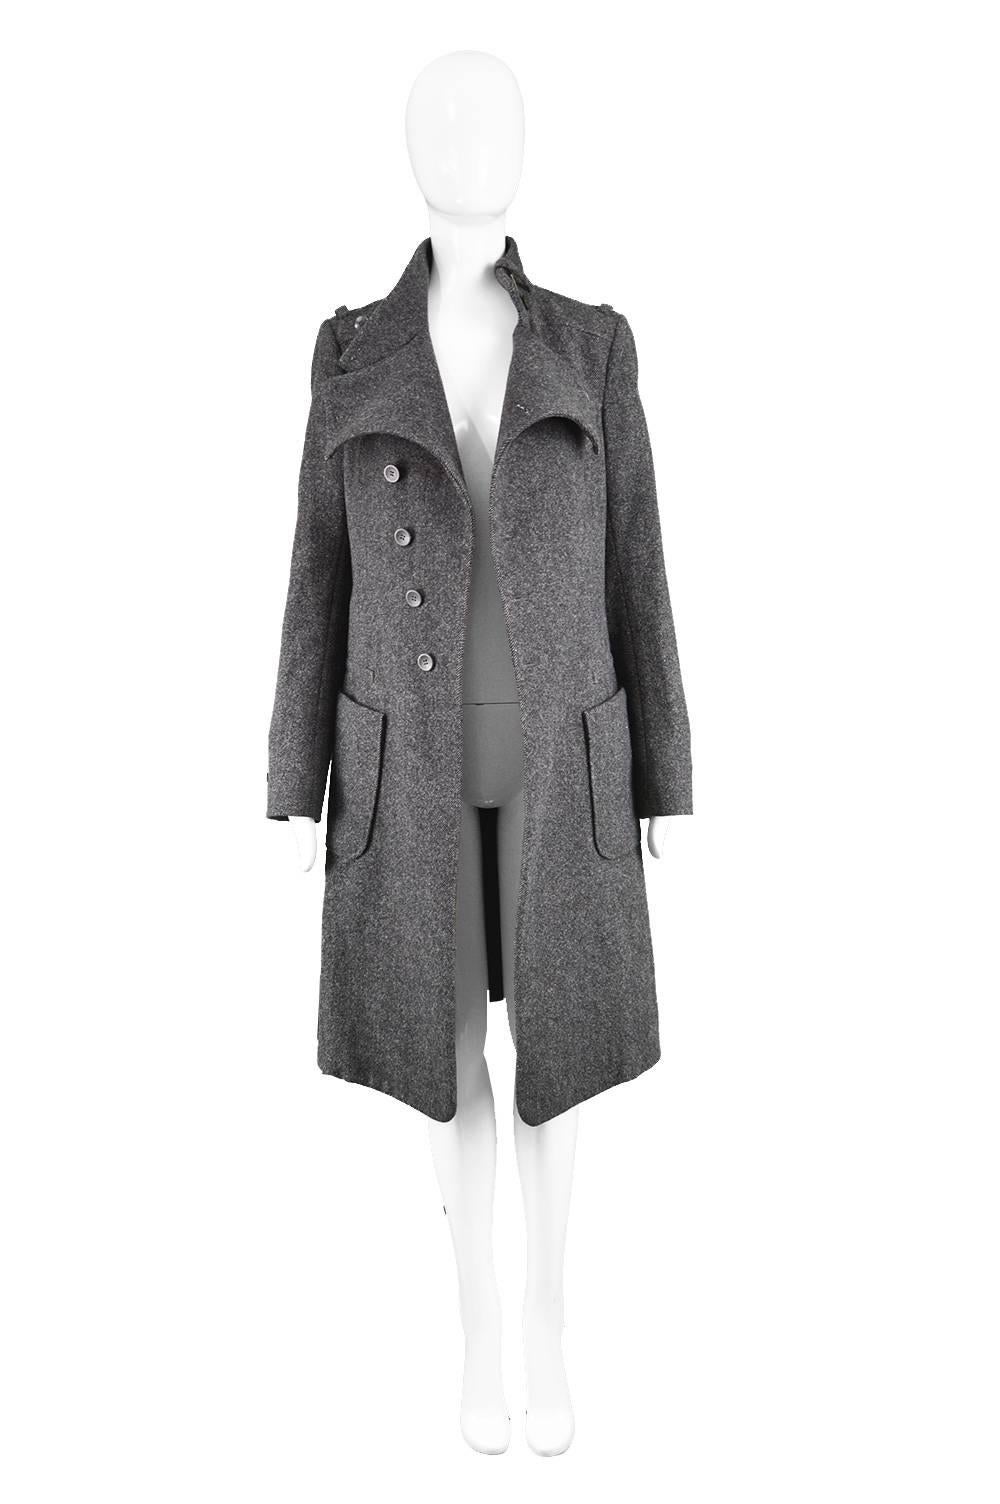 Women's Balenciaga Nicolas Ghesquiere Gray Wool and Cashmere Military Style Coat, 2005